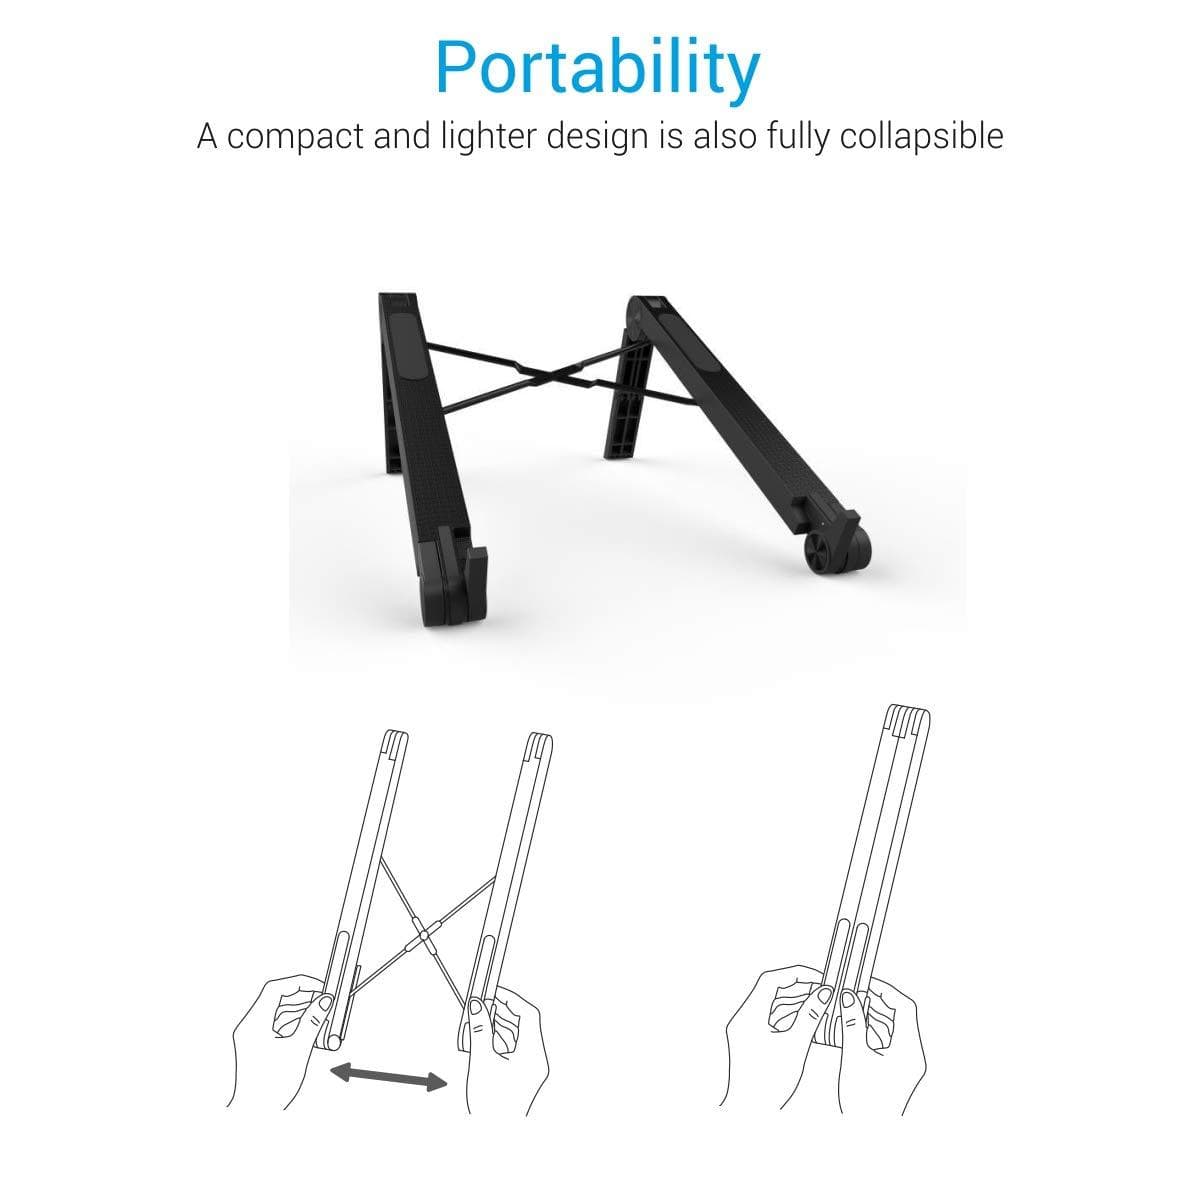 Portronics My Buddy Lite Plus POR-1118 Adjustable Height with Air-Ventilation Ergonomic Design Laptop Stand for Table Bed-laptop care-dealsplant